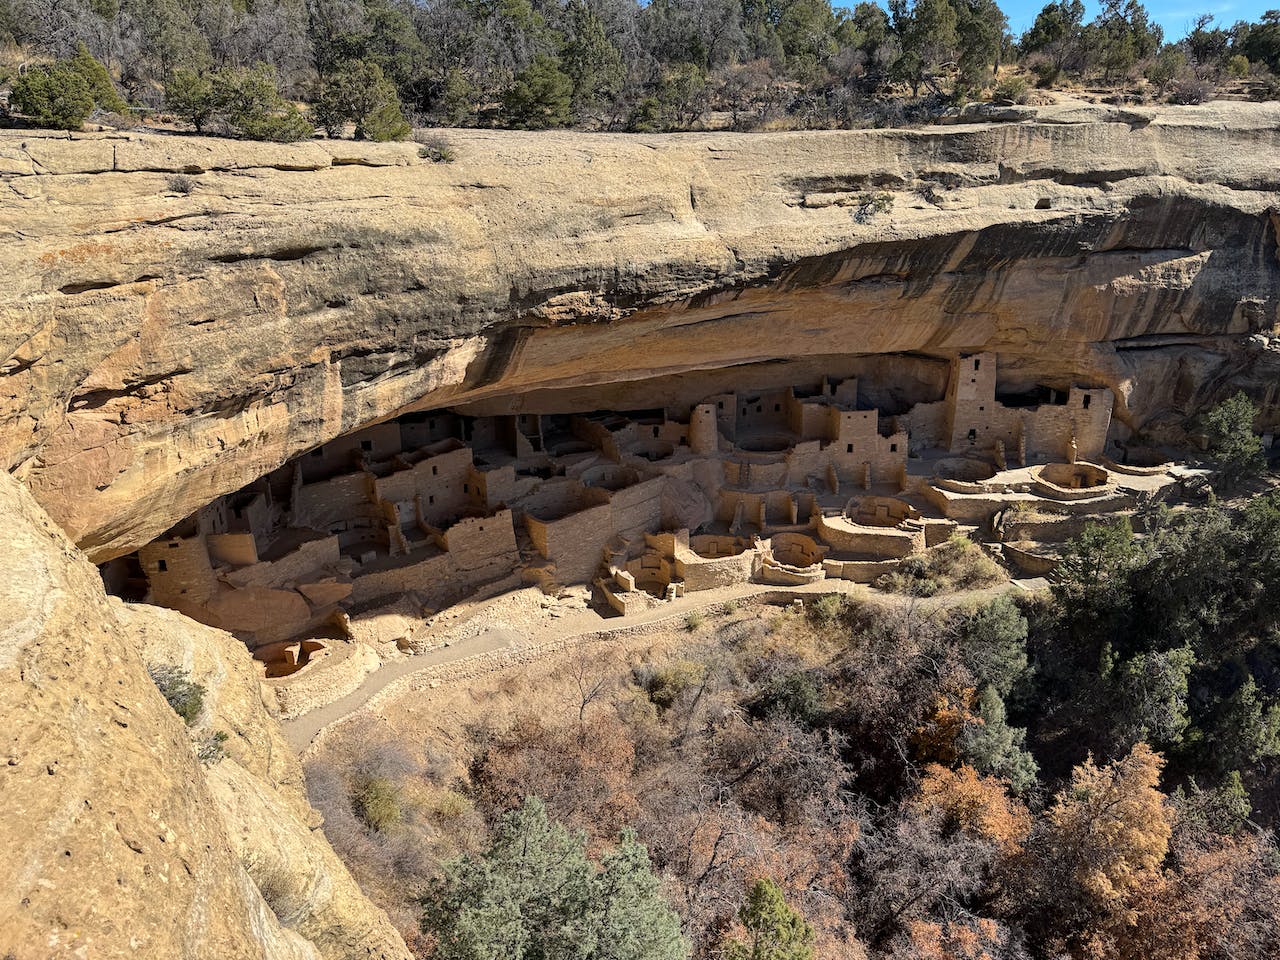 Mesa Verde National Park ruins - a city of stone carved into the side of a canyon